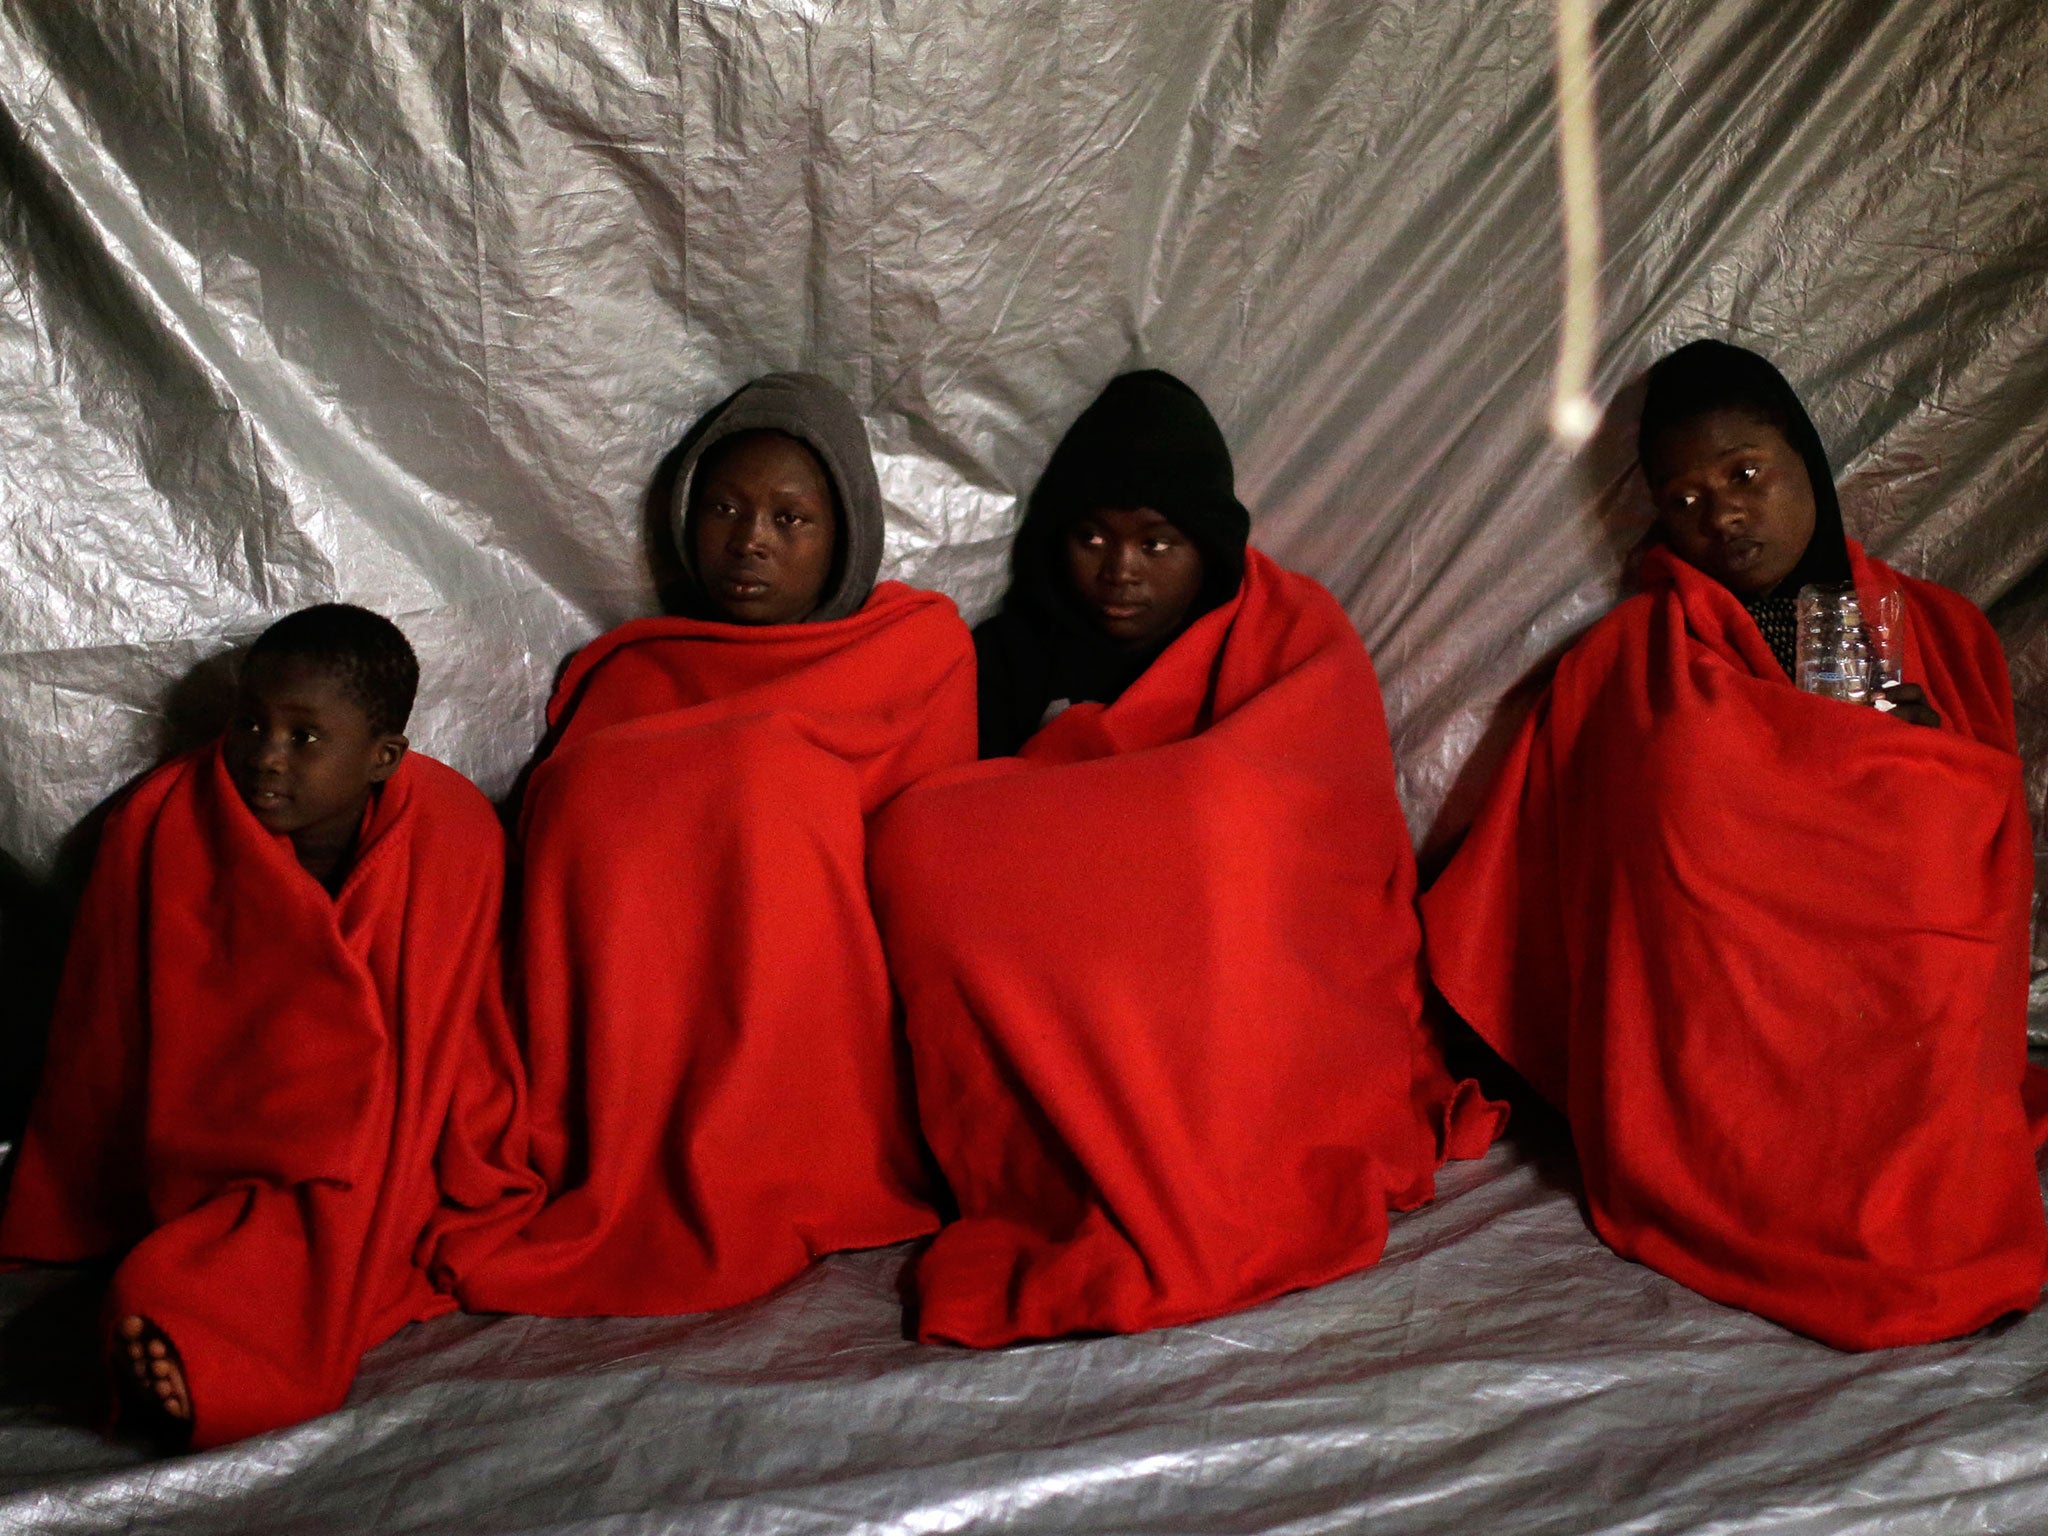 Sub-Saharan refugees rescued in the Mediterranean Sea earlier this year